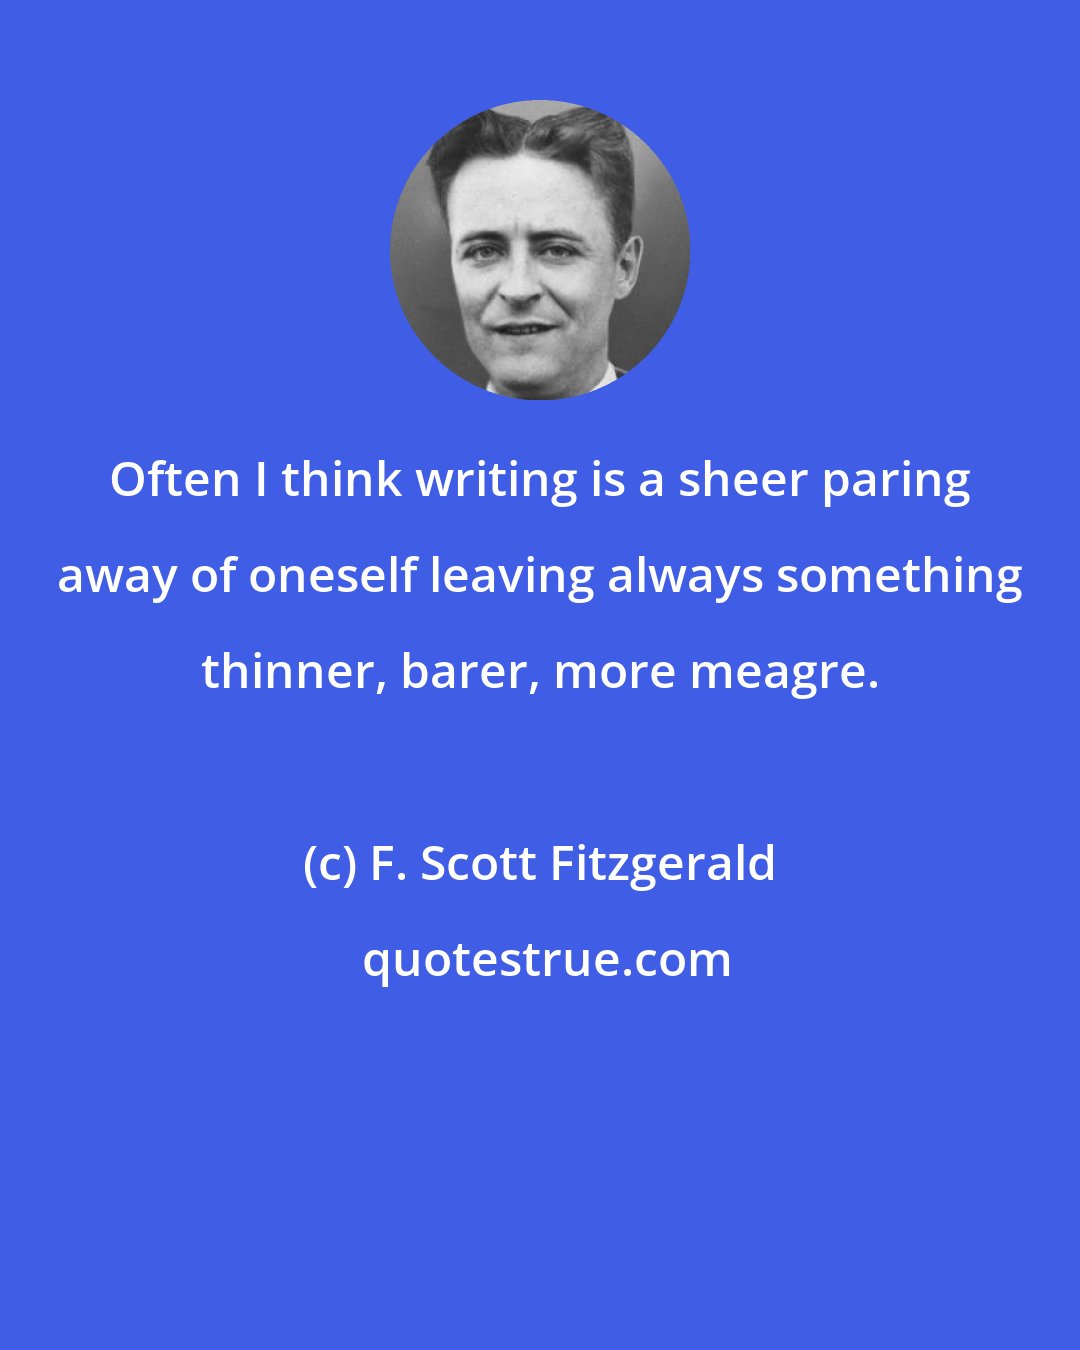 F. Scott Fitzgerald: Often I think writing is a sheer paring away of oneself leaving always something thinner, barer, more meagre.